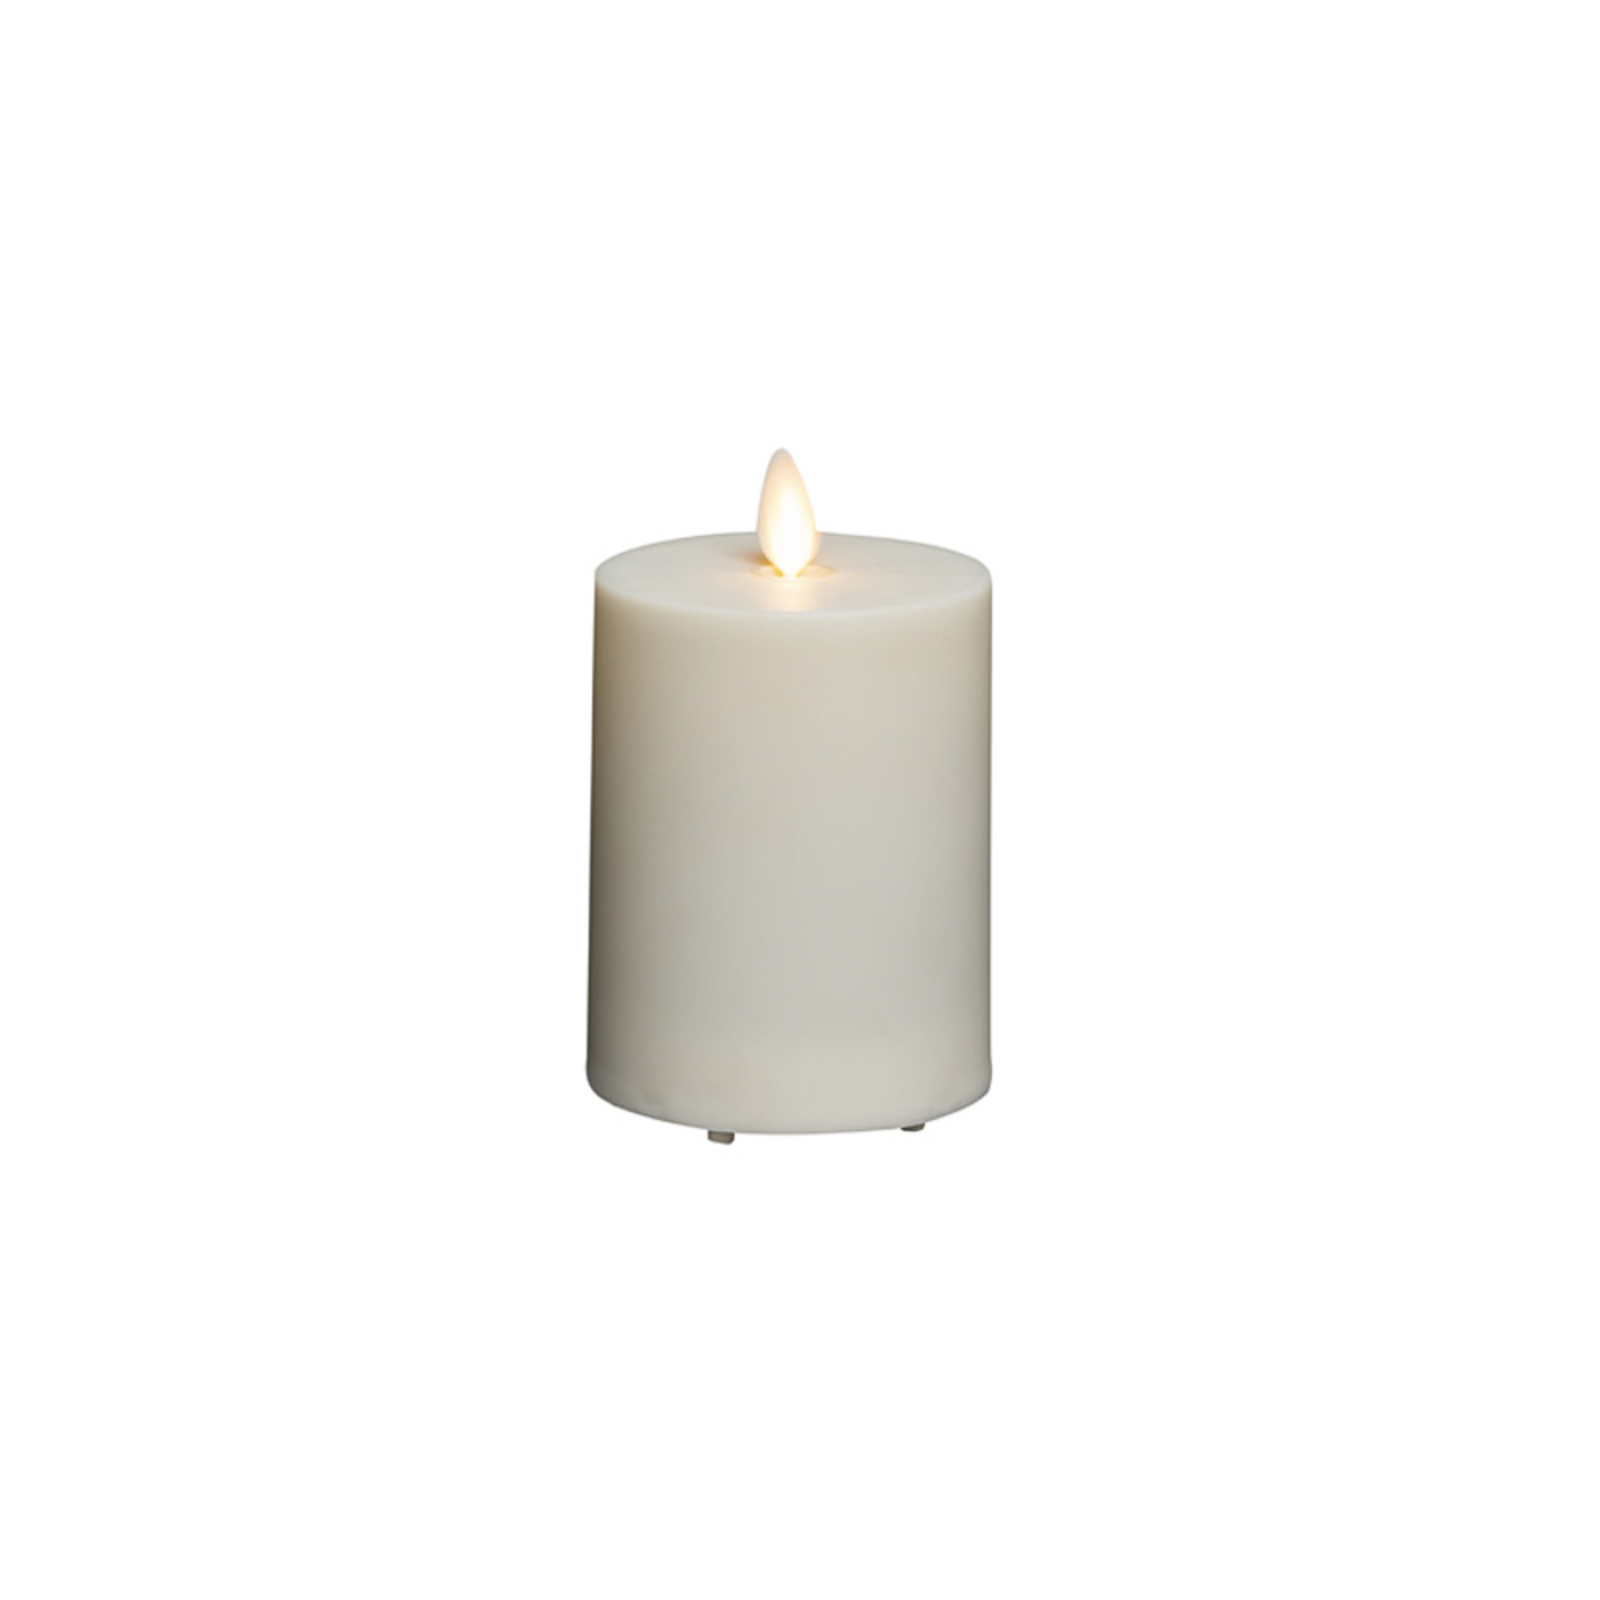 LED candle IP44 cream white smooth Height 13cm